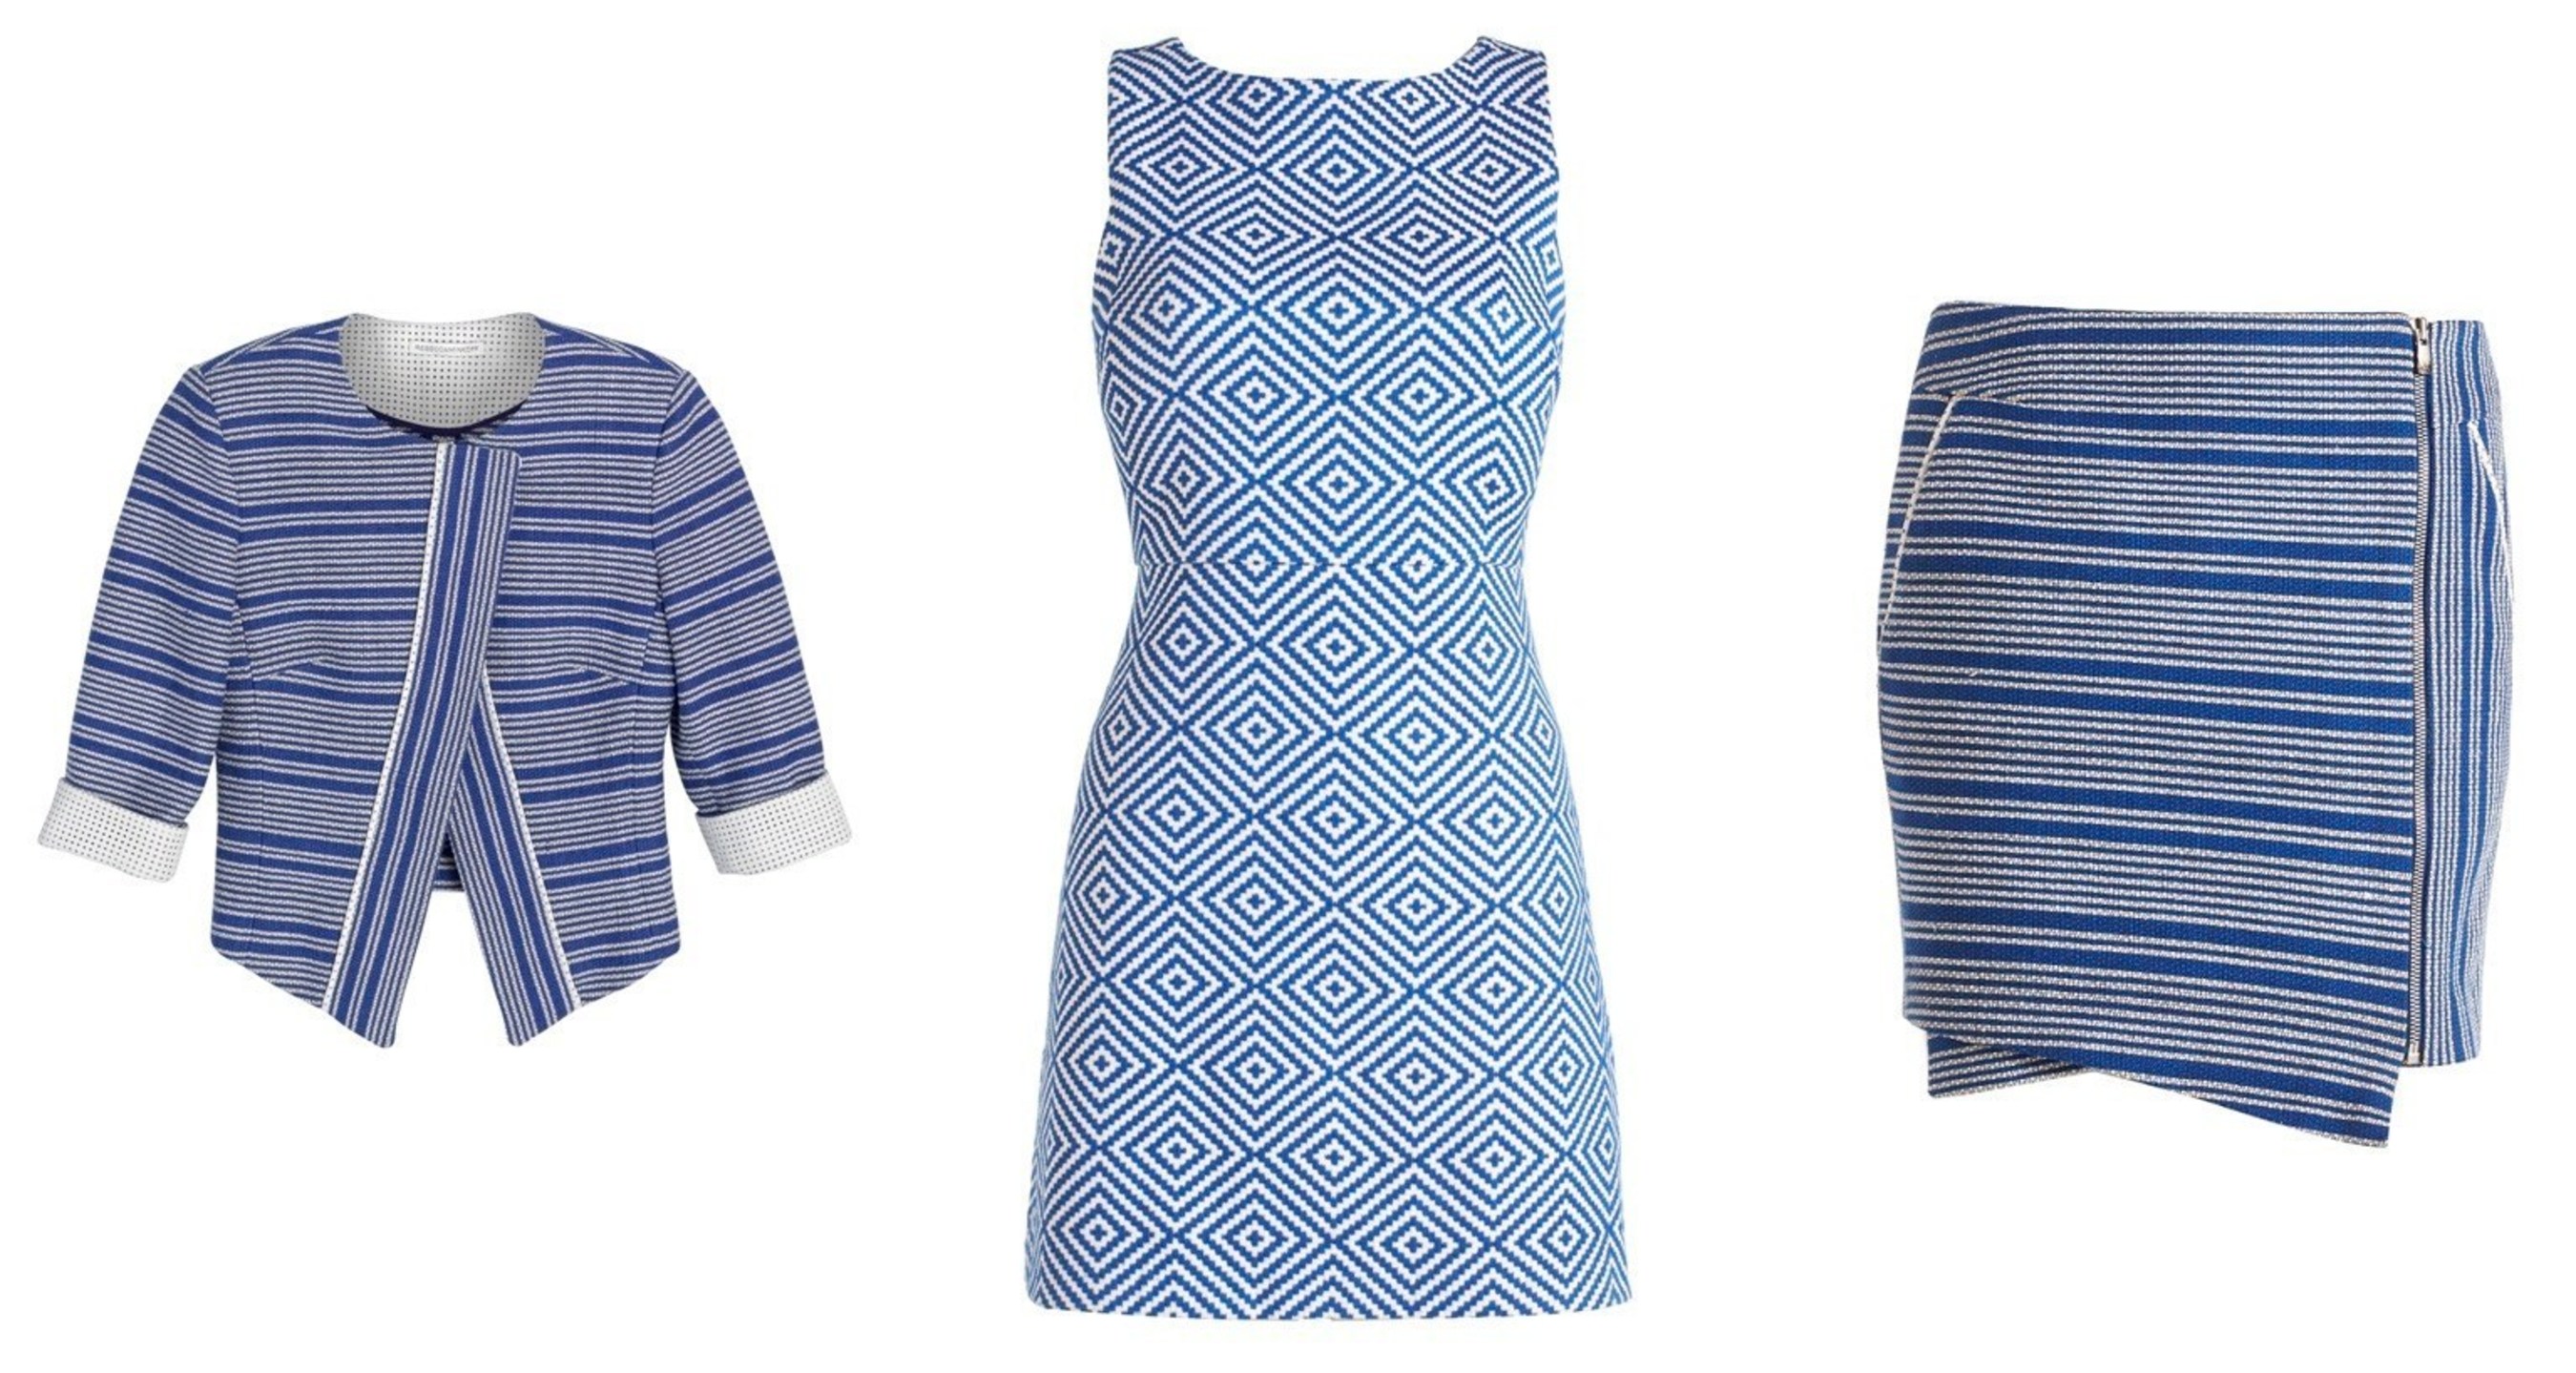 Nordstrom & Piece & Co. Launch Collection with DVF, Tory Burch, Honest Co.  and More